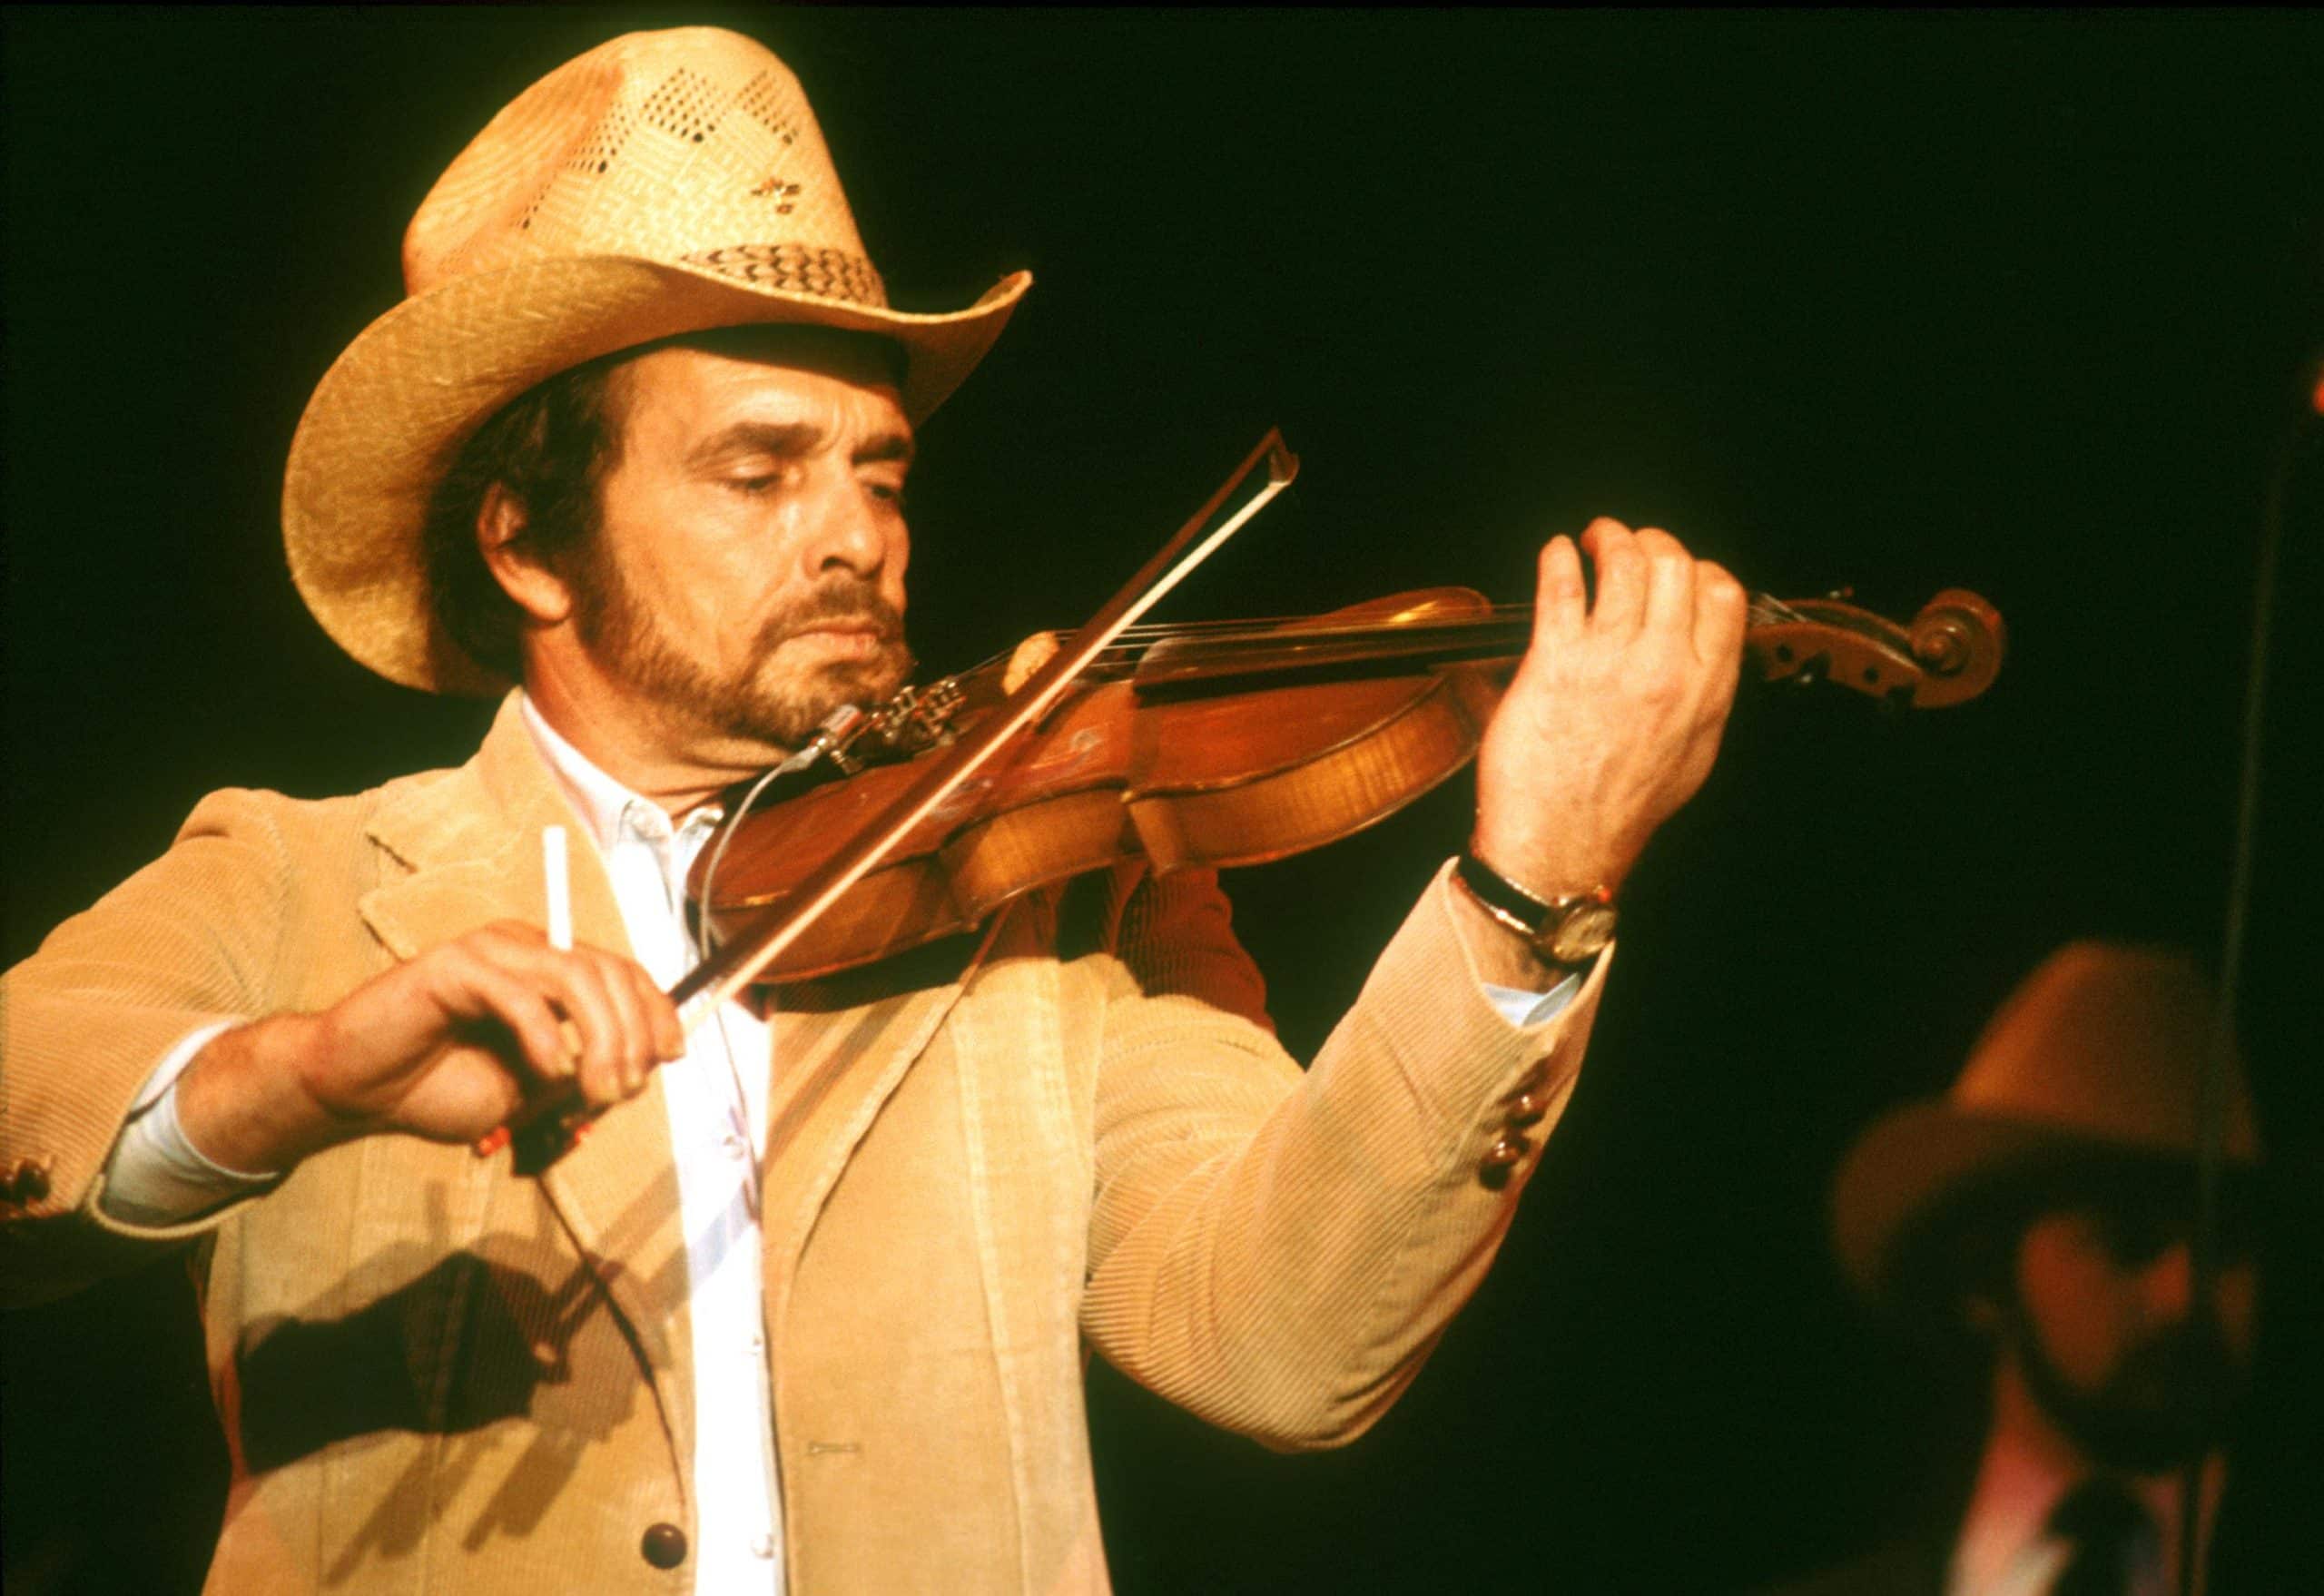 Toby Keith helped country legend Merle Haggard through one of his last concerts